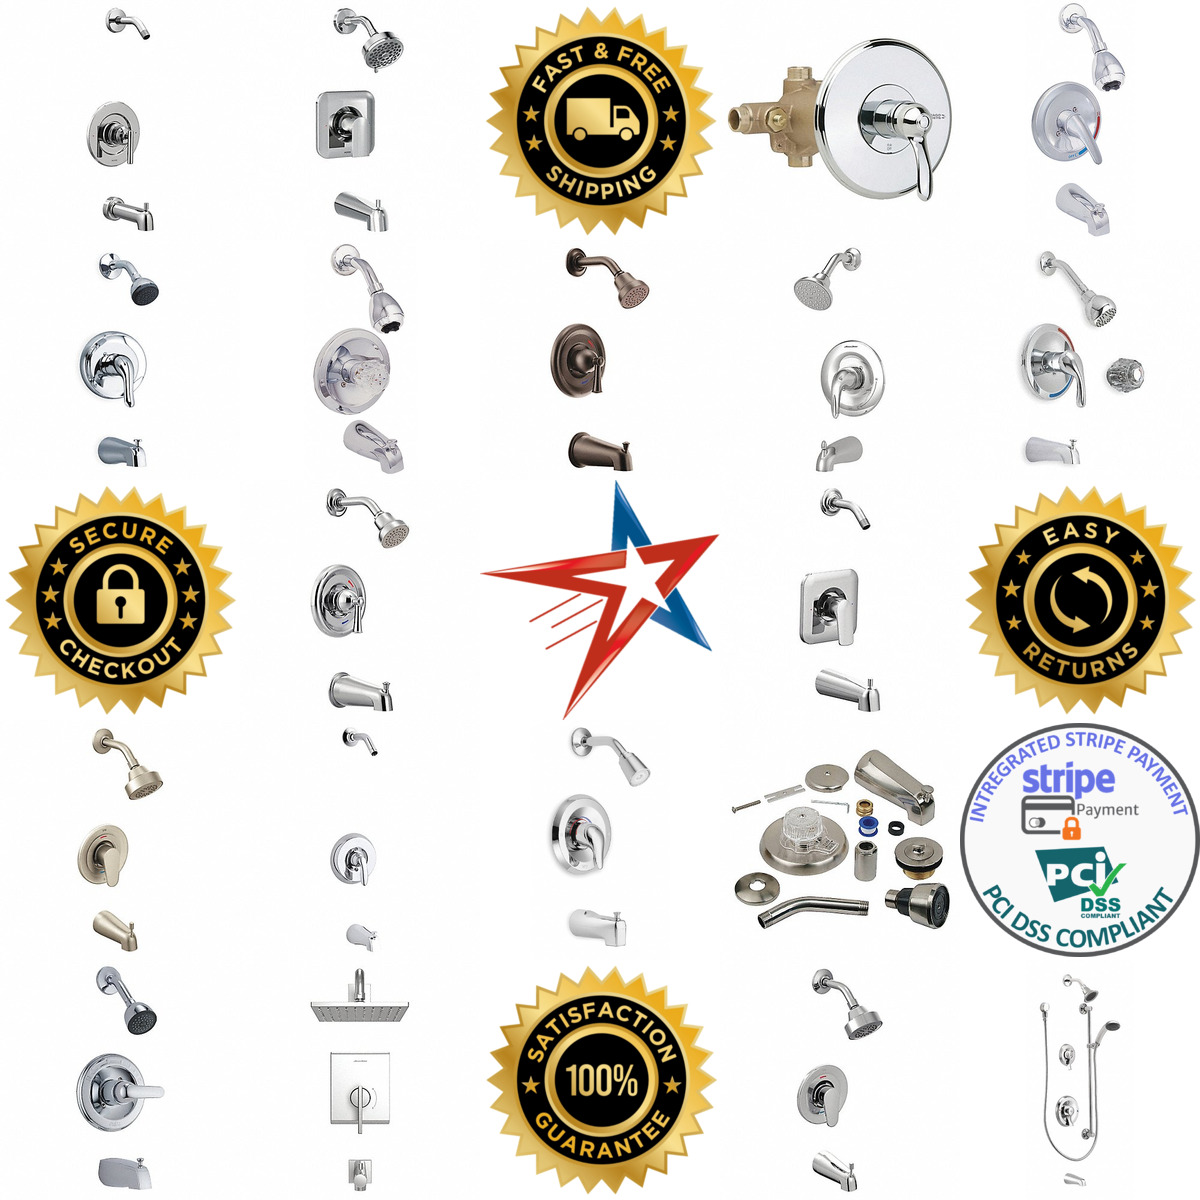 A selection of Tub and Shower Faucets products on GoVets